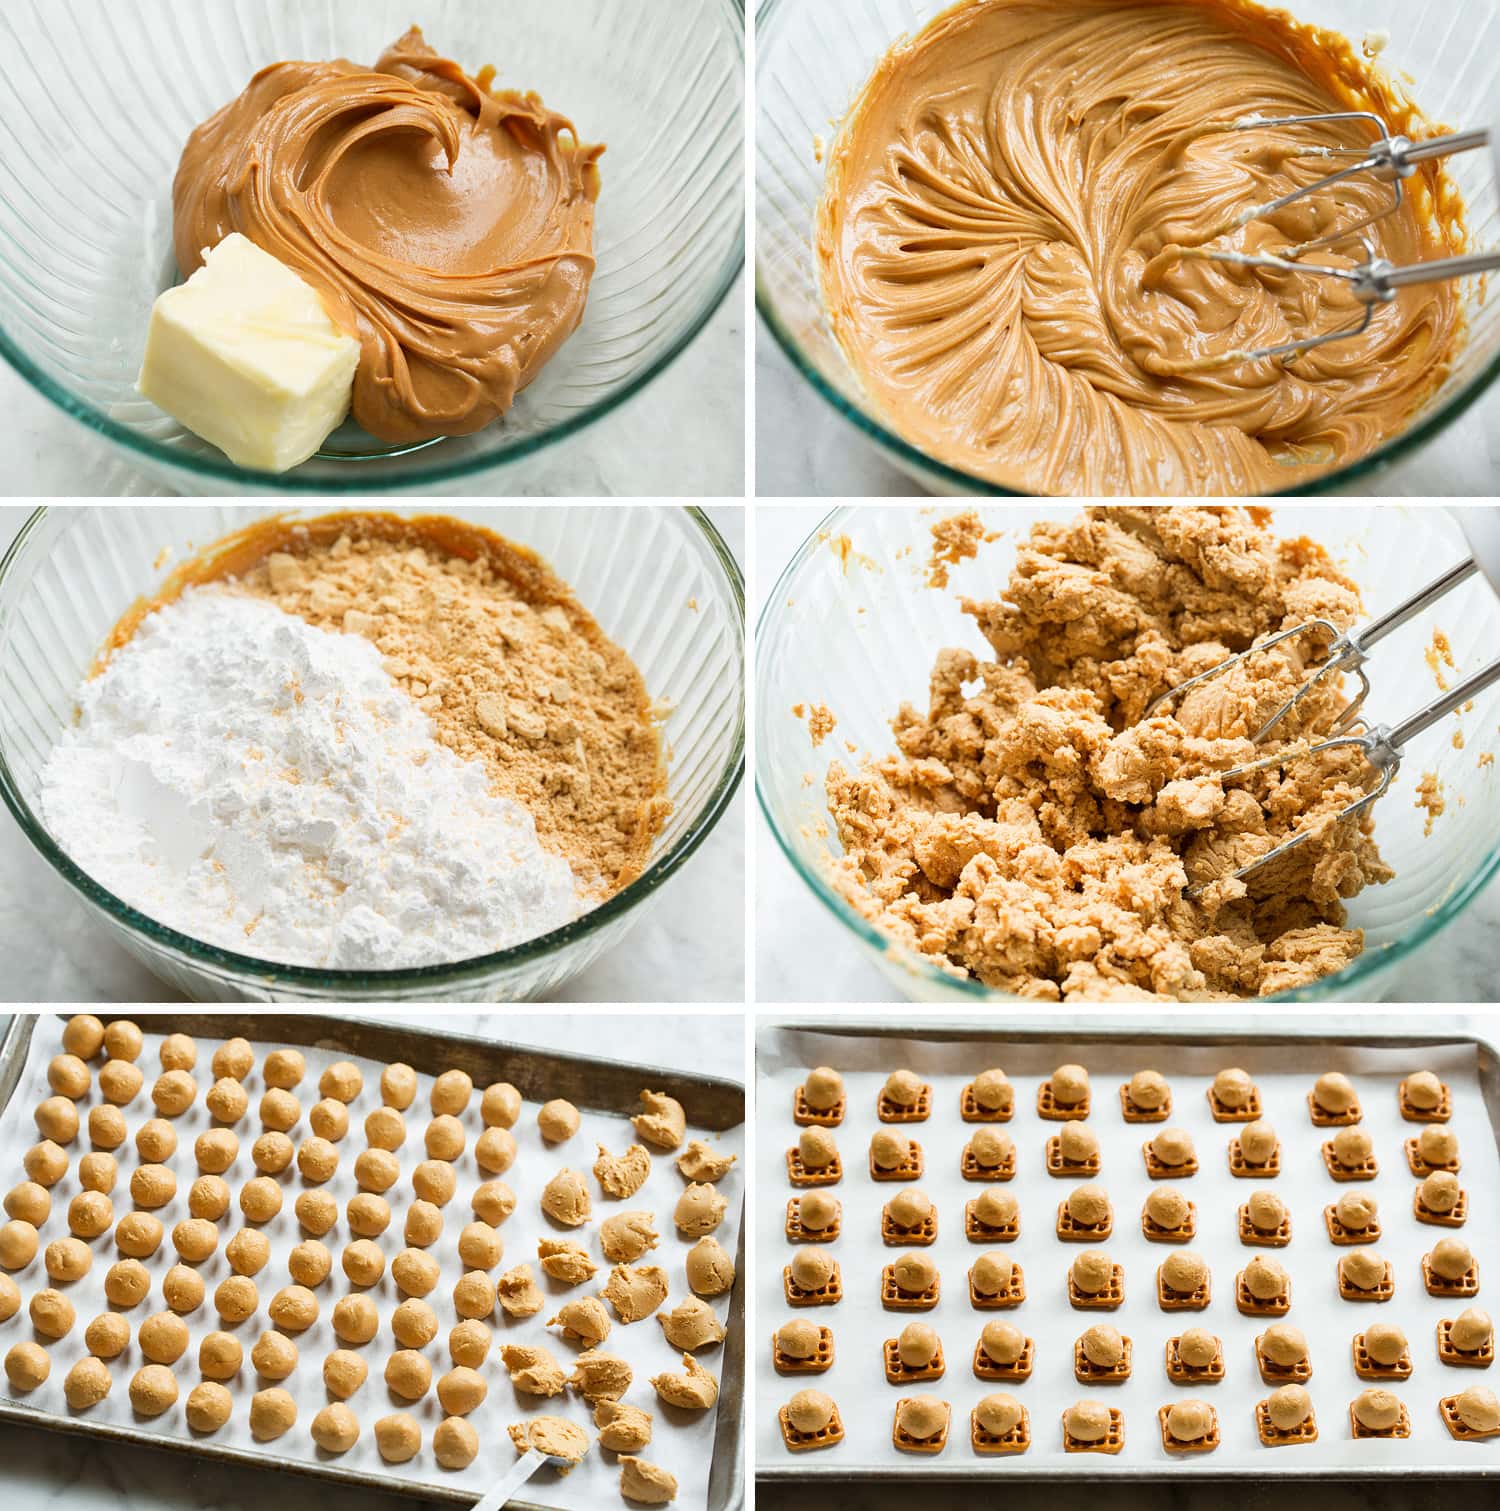 Steps of mixing sweetened peanut butter filling, rolling and placing on snap pretzels.